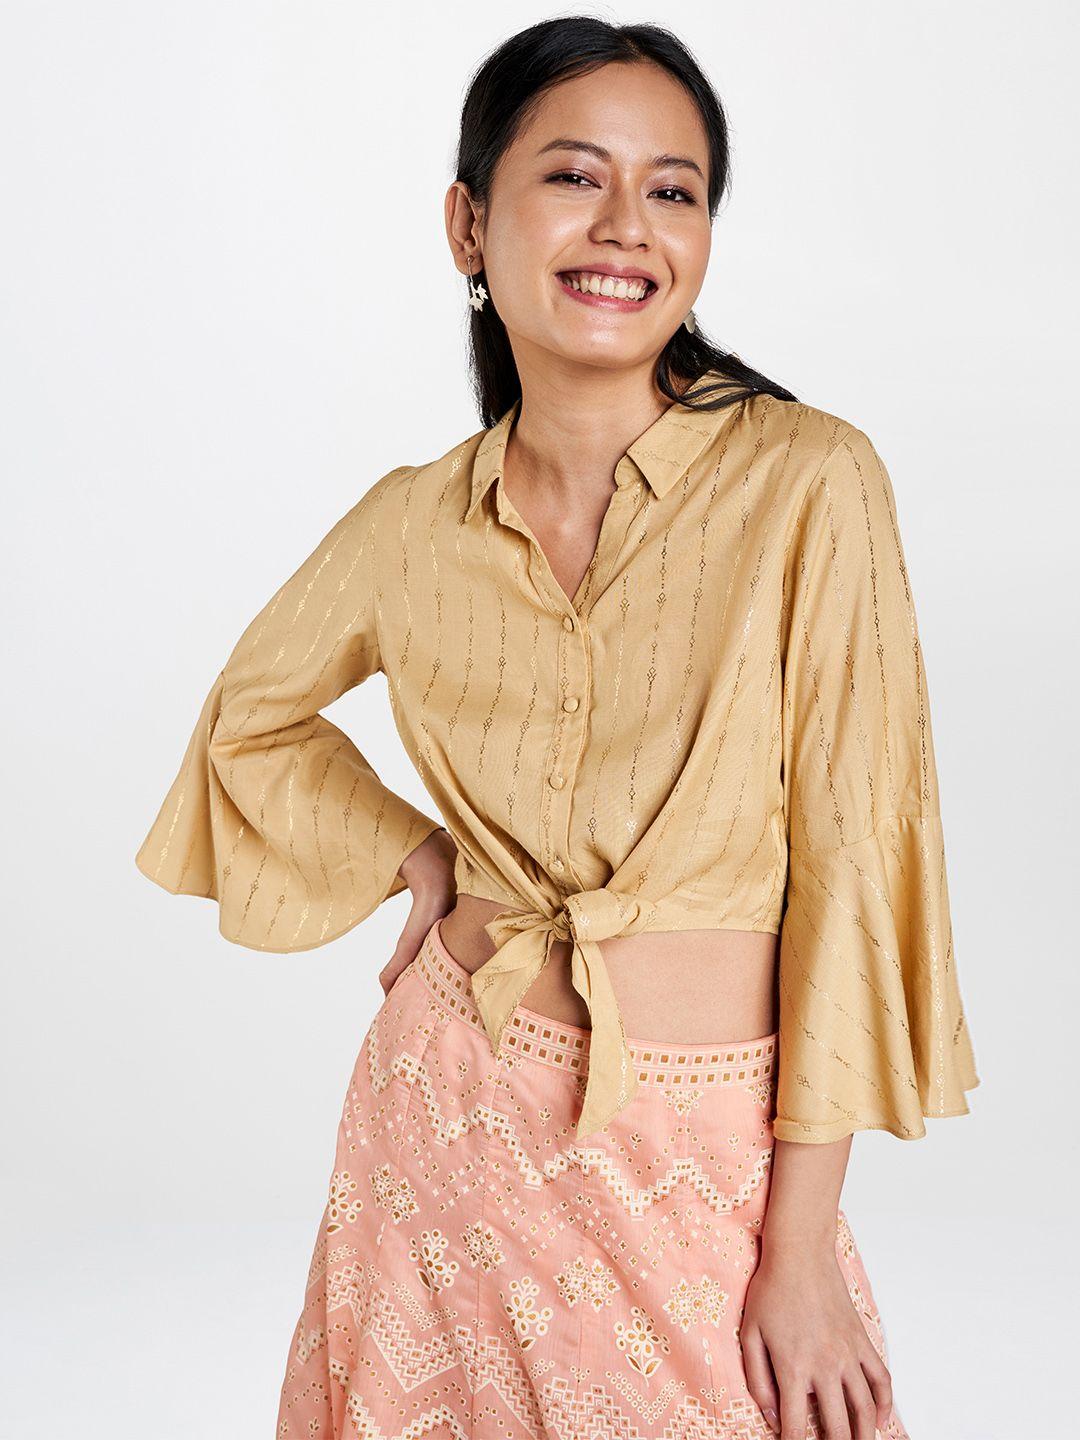 global desi beige & gold-toned shirt style crop top with tie-up detail